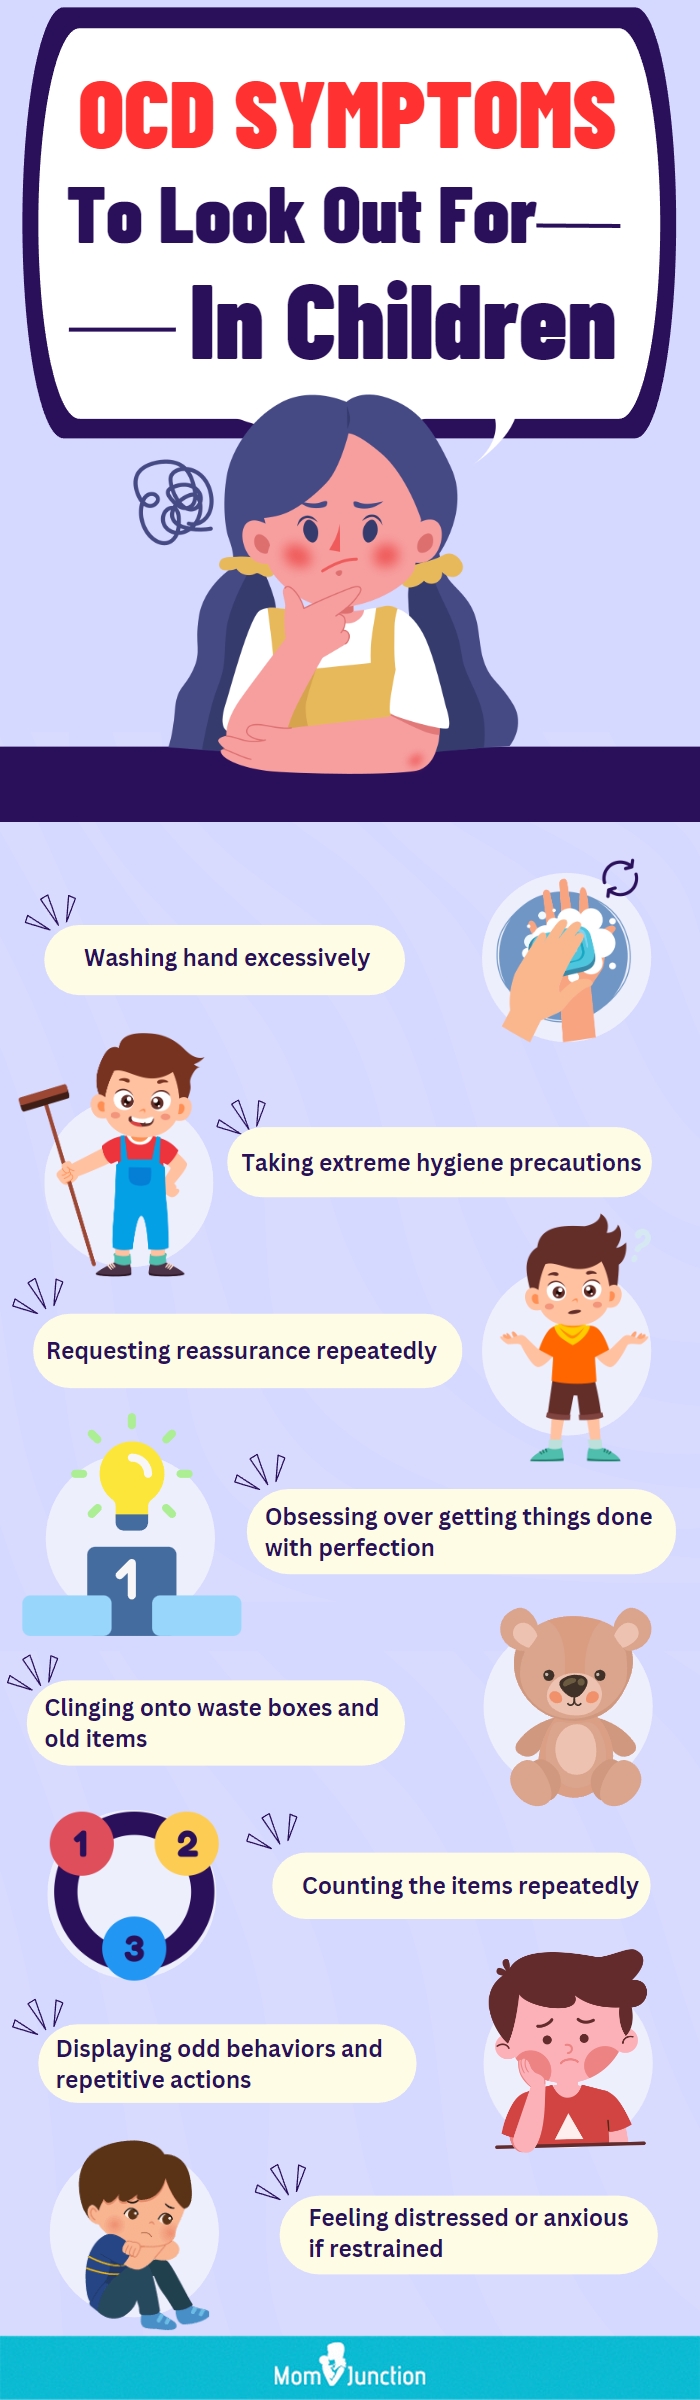 ocd symptoms to look out for in children (infographic)